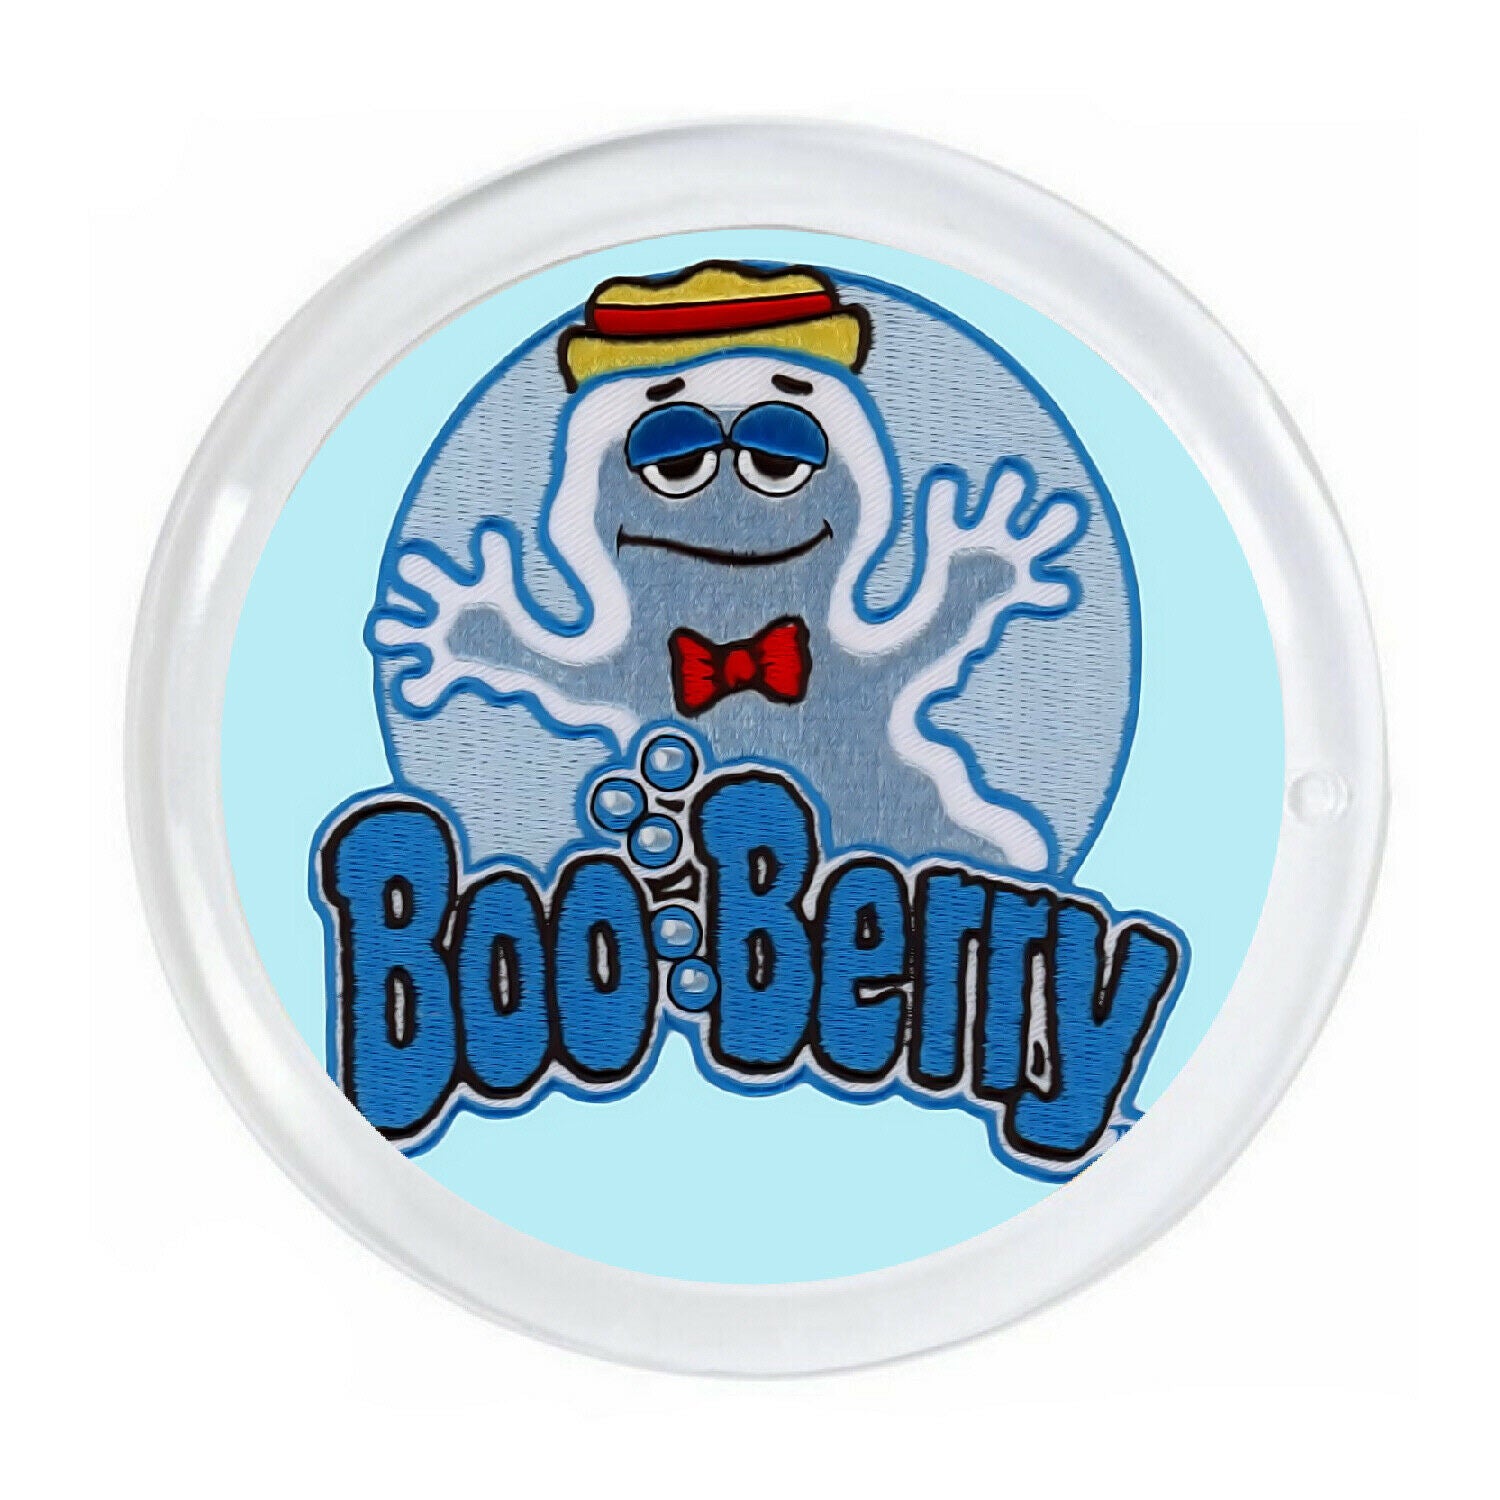 Boo Berry Cereal Magnet big round almost 3 inch diameter with border.